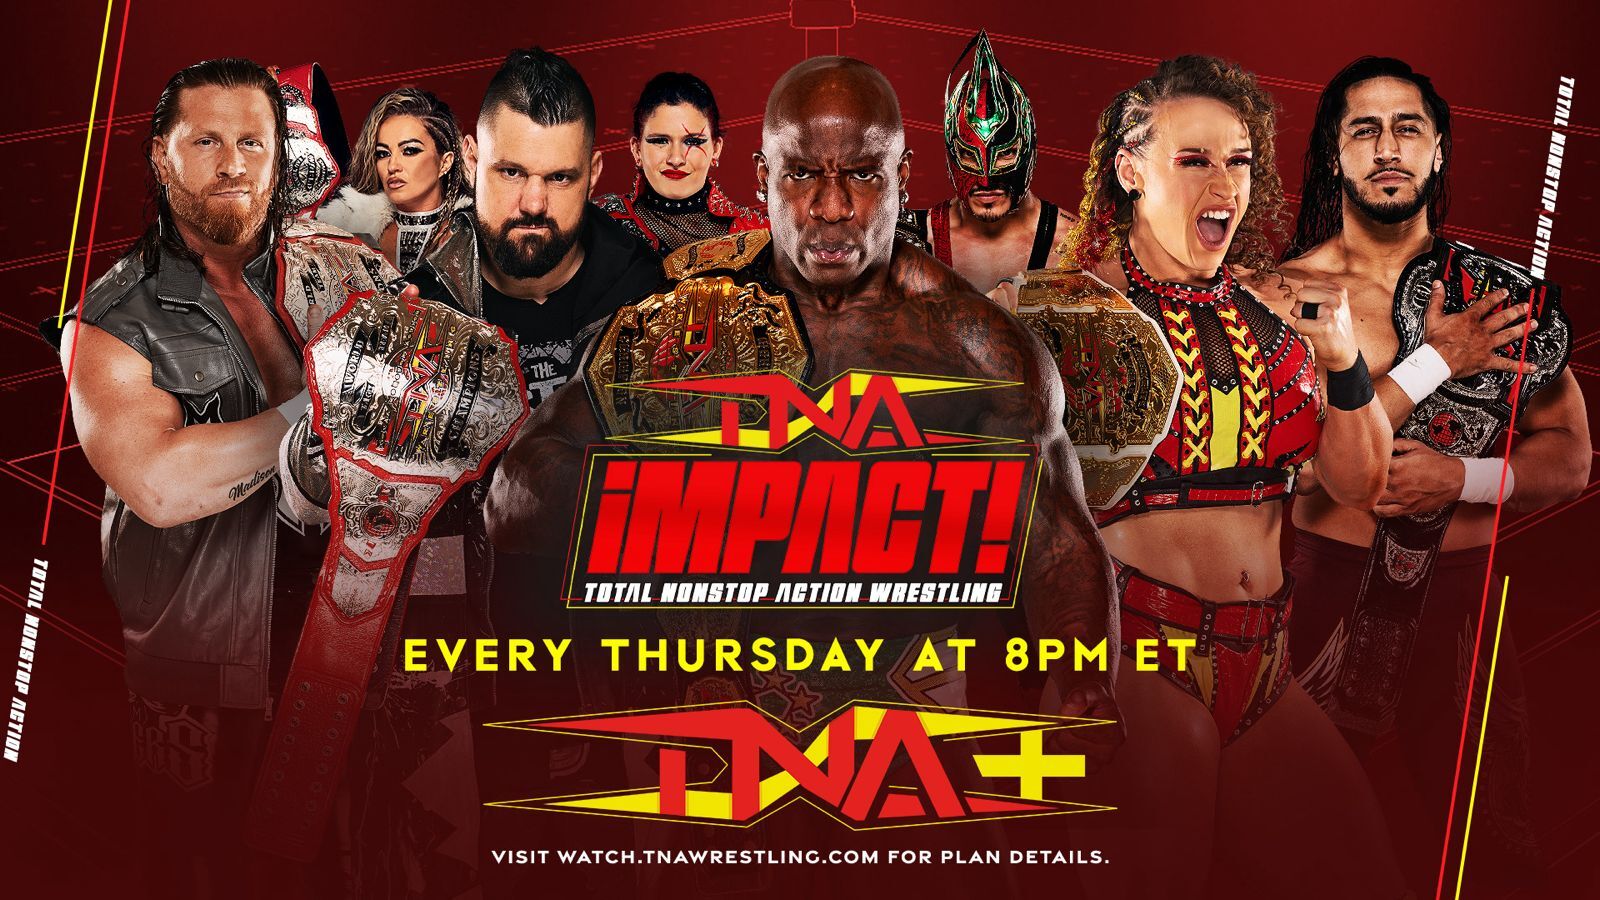 TNA Wrestling’s Weekly iMPACT! TV Show Now Available At 8pm EST On The TNA+ App, Starting June 6 – TNA Wrestling